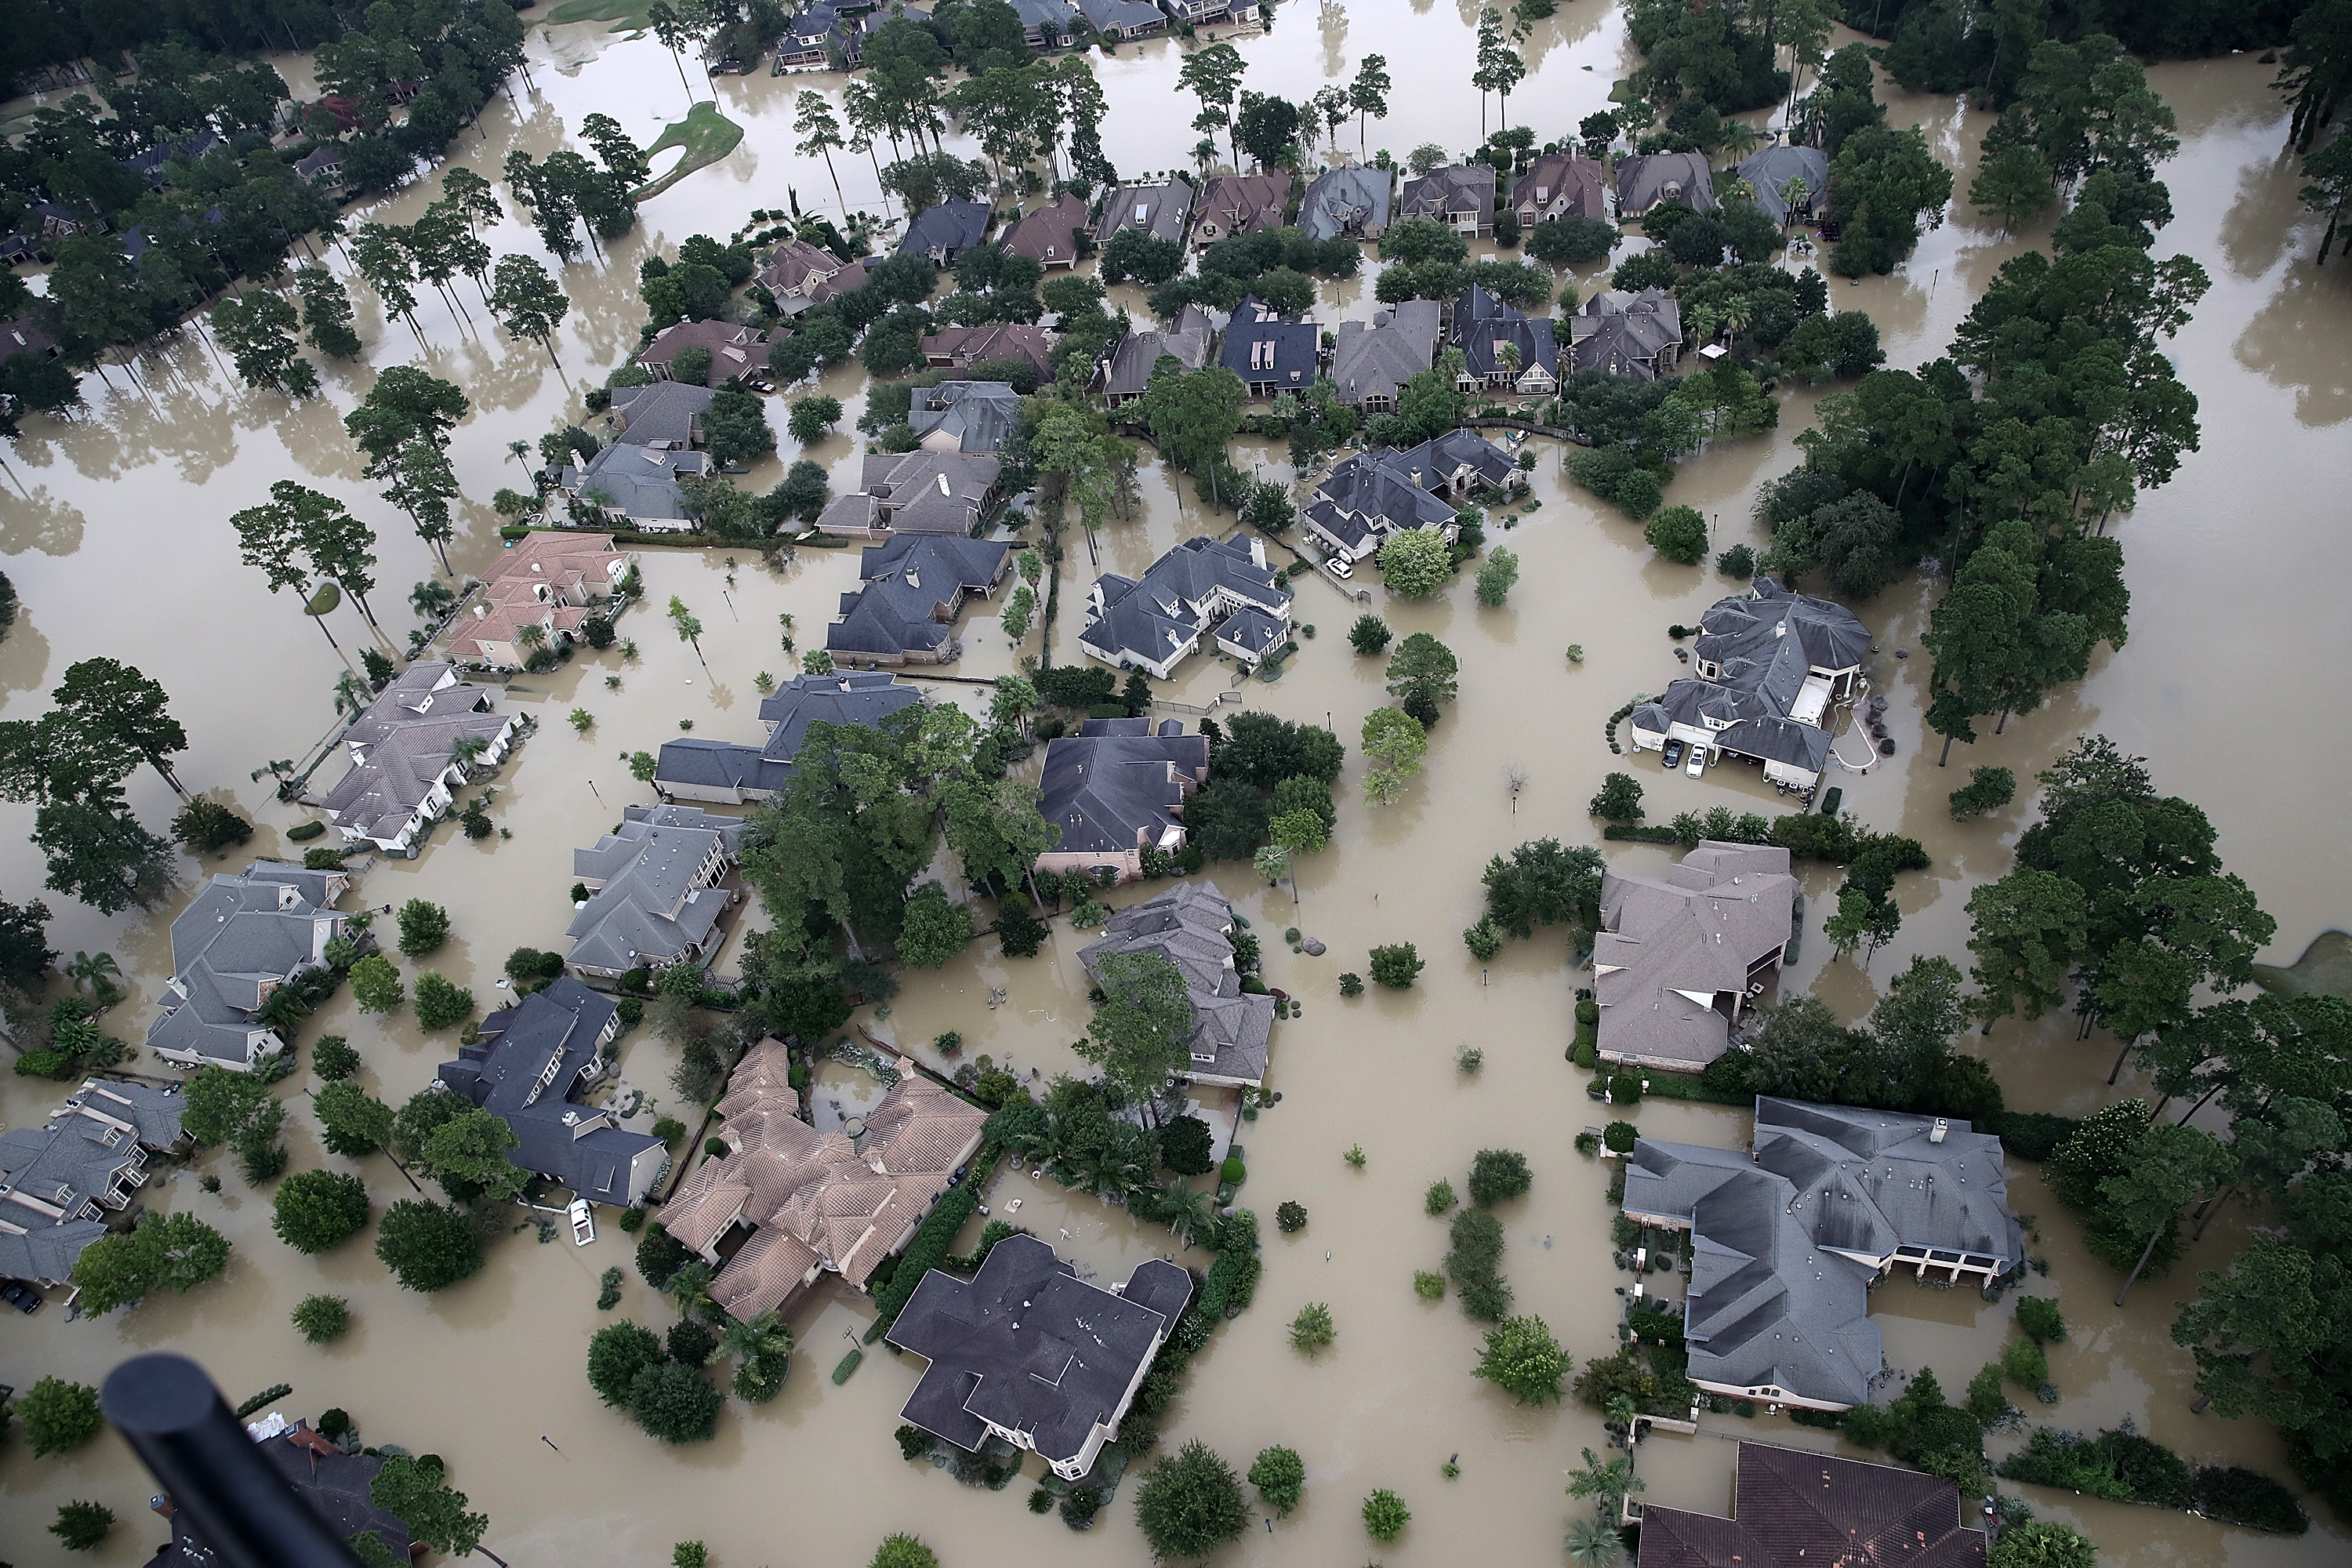 Flooded homes are shown near Lake Houston following Hurricane Harvey August 30, 2017 in Houston, Texas. The city of Houston is still experiencing severe flooding in some areas due to the accumulation of historic levels of rainfall, though the storm has moved to the north and east. (Win McNamee&mdash;Getty Images)